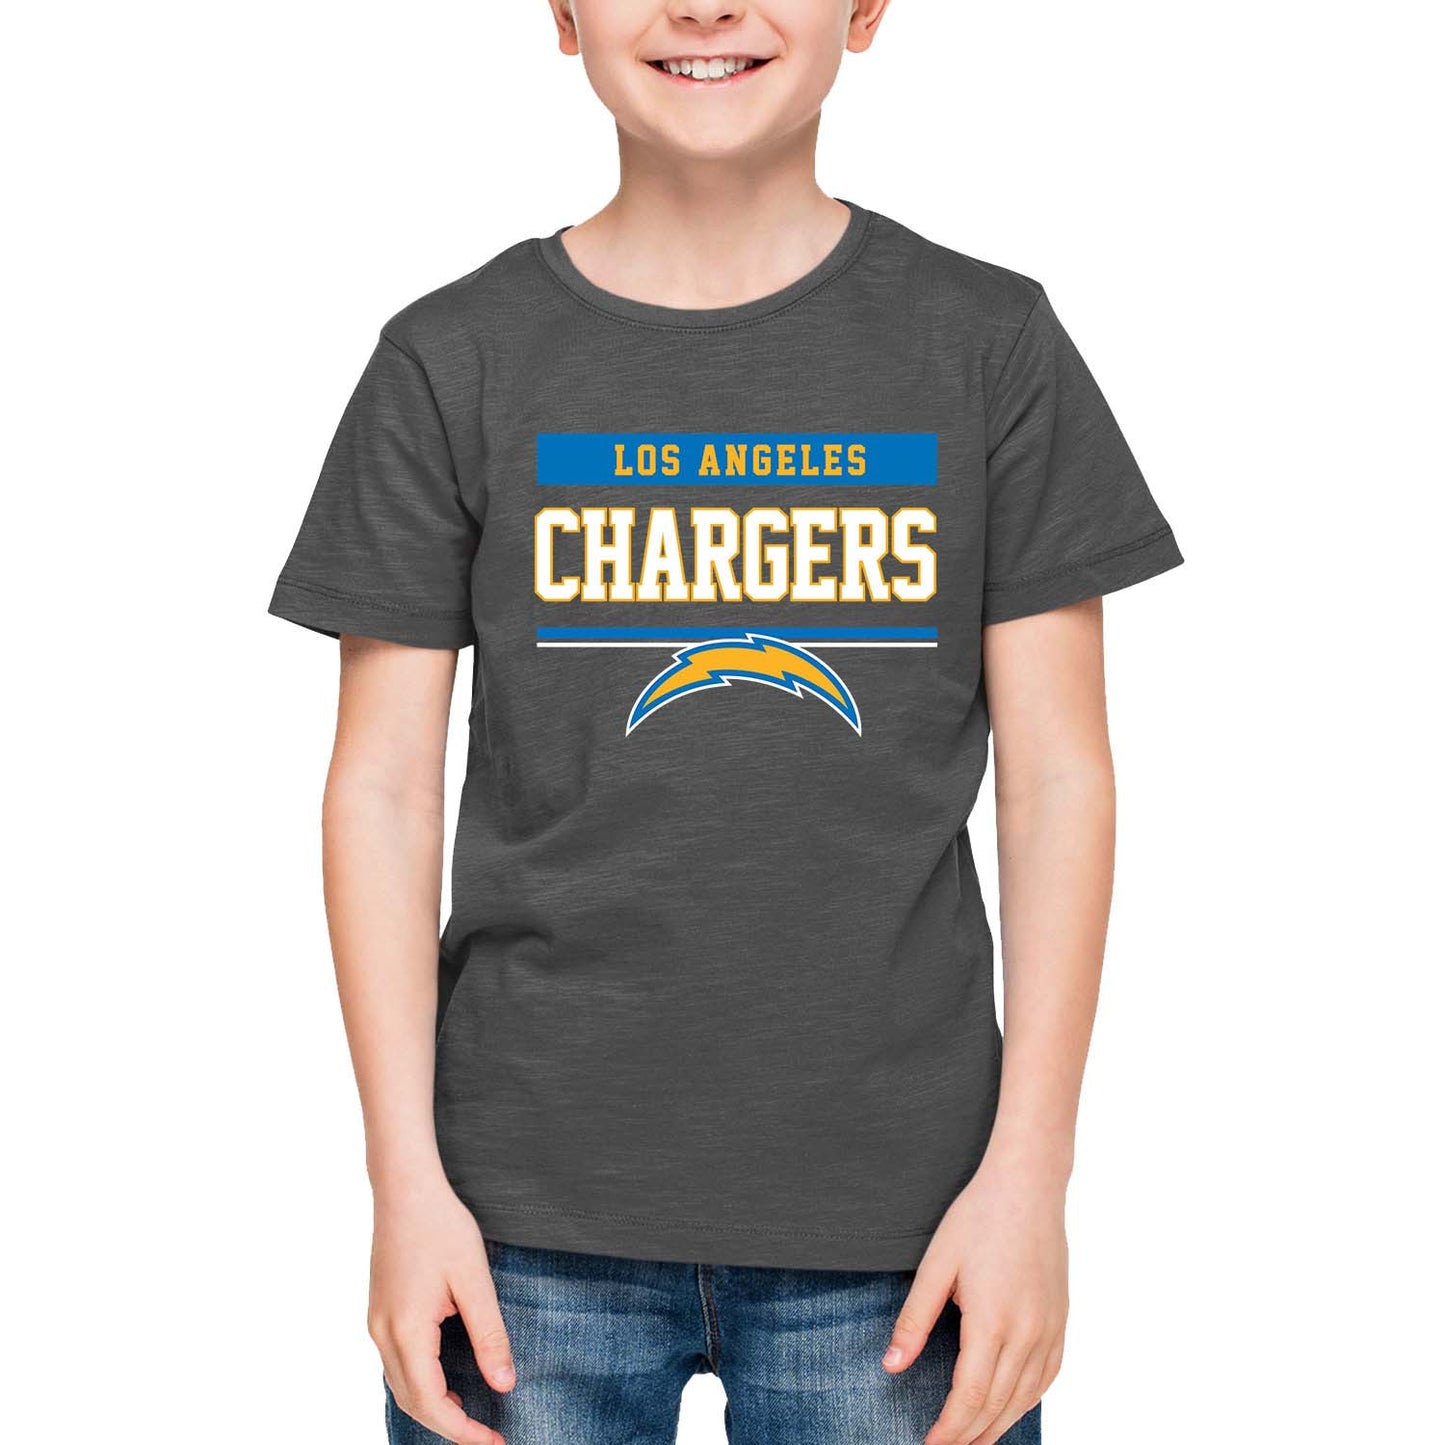 Los Angeles Chargers NFL Youth Short Sleeve Charcoal T Shirt - Charcoal